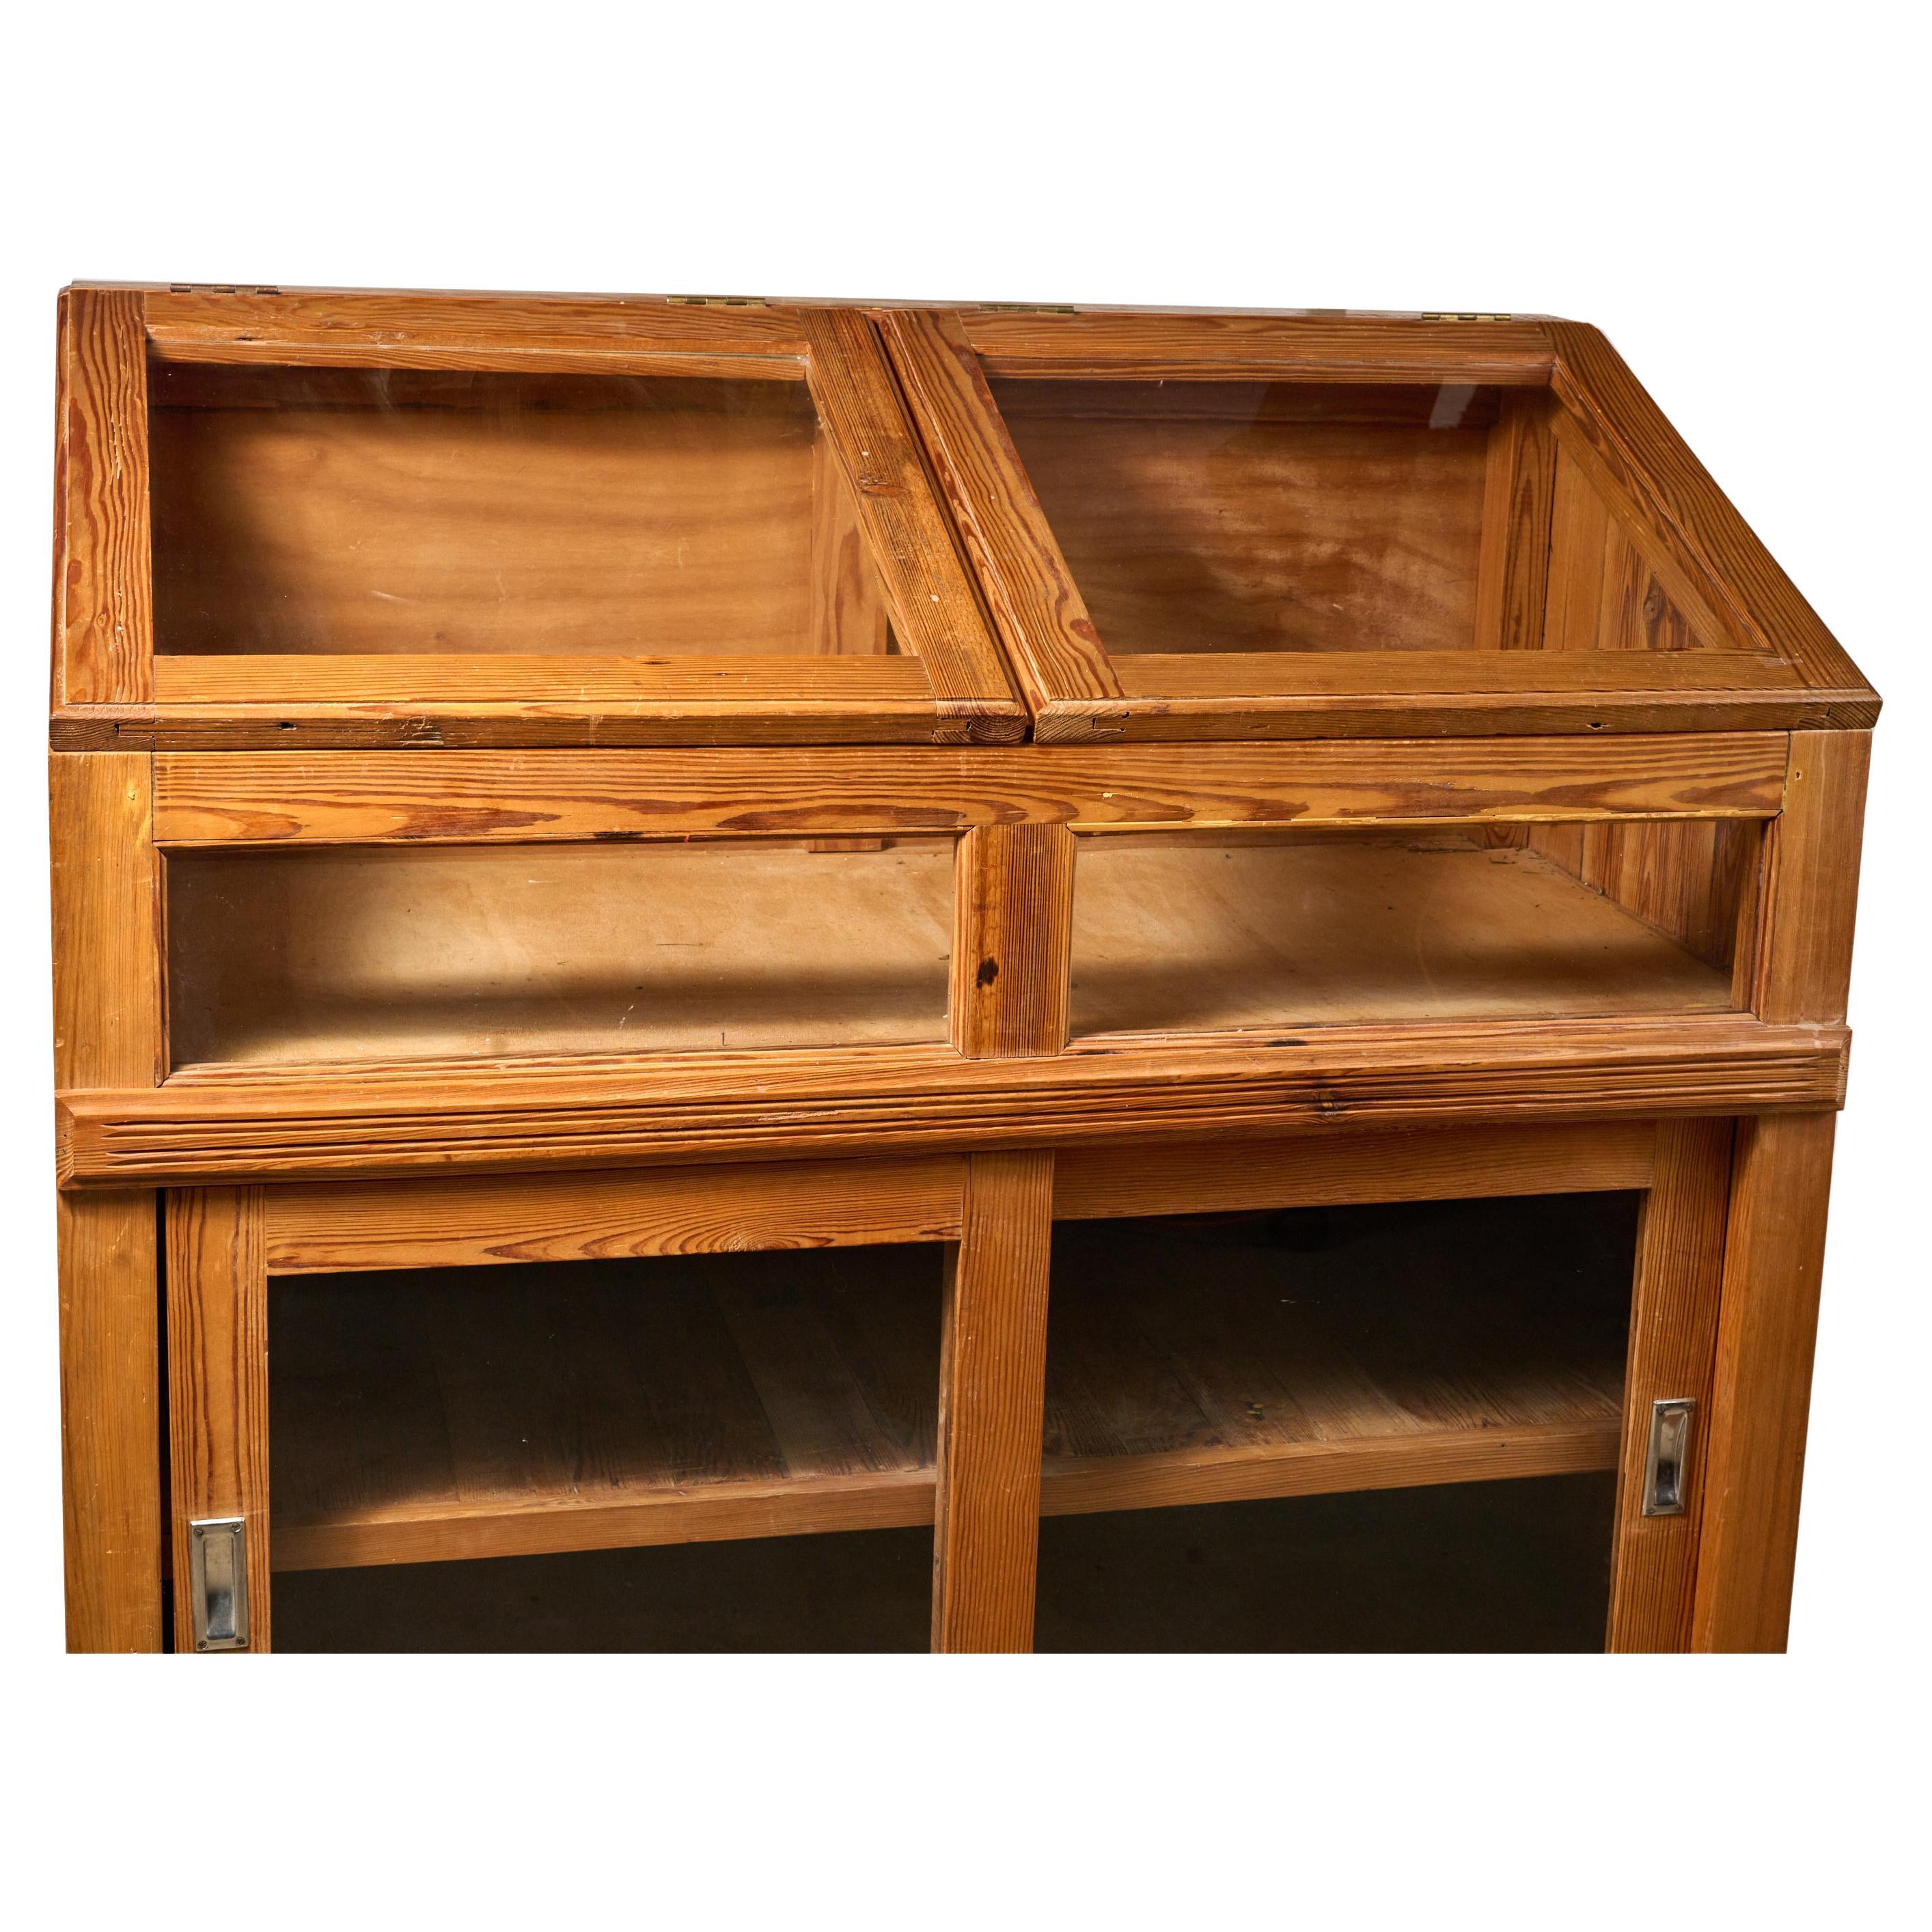 Argentine pitch pine and glass display case with plenty of storage. Quite useful. Great condition. Top glass doors flip up for easy access. 
